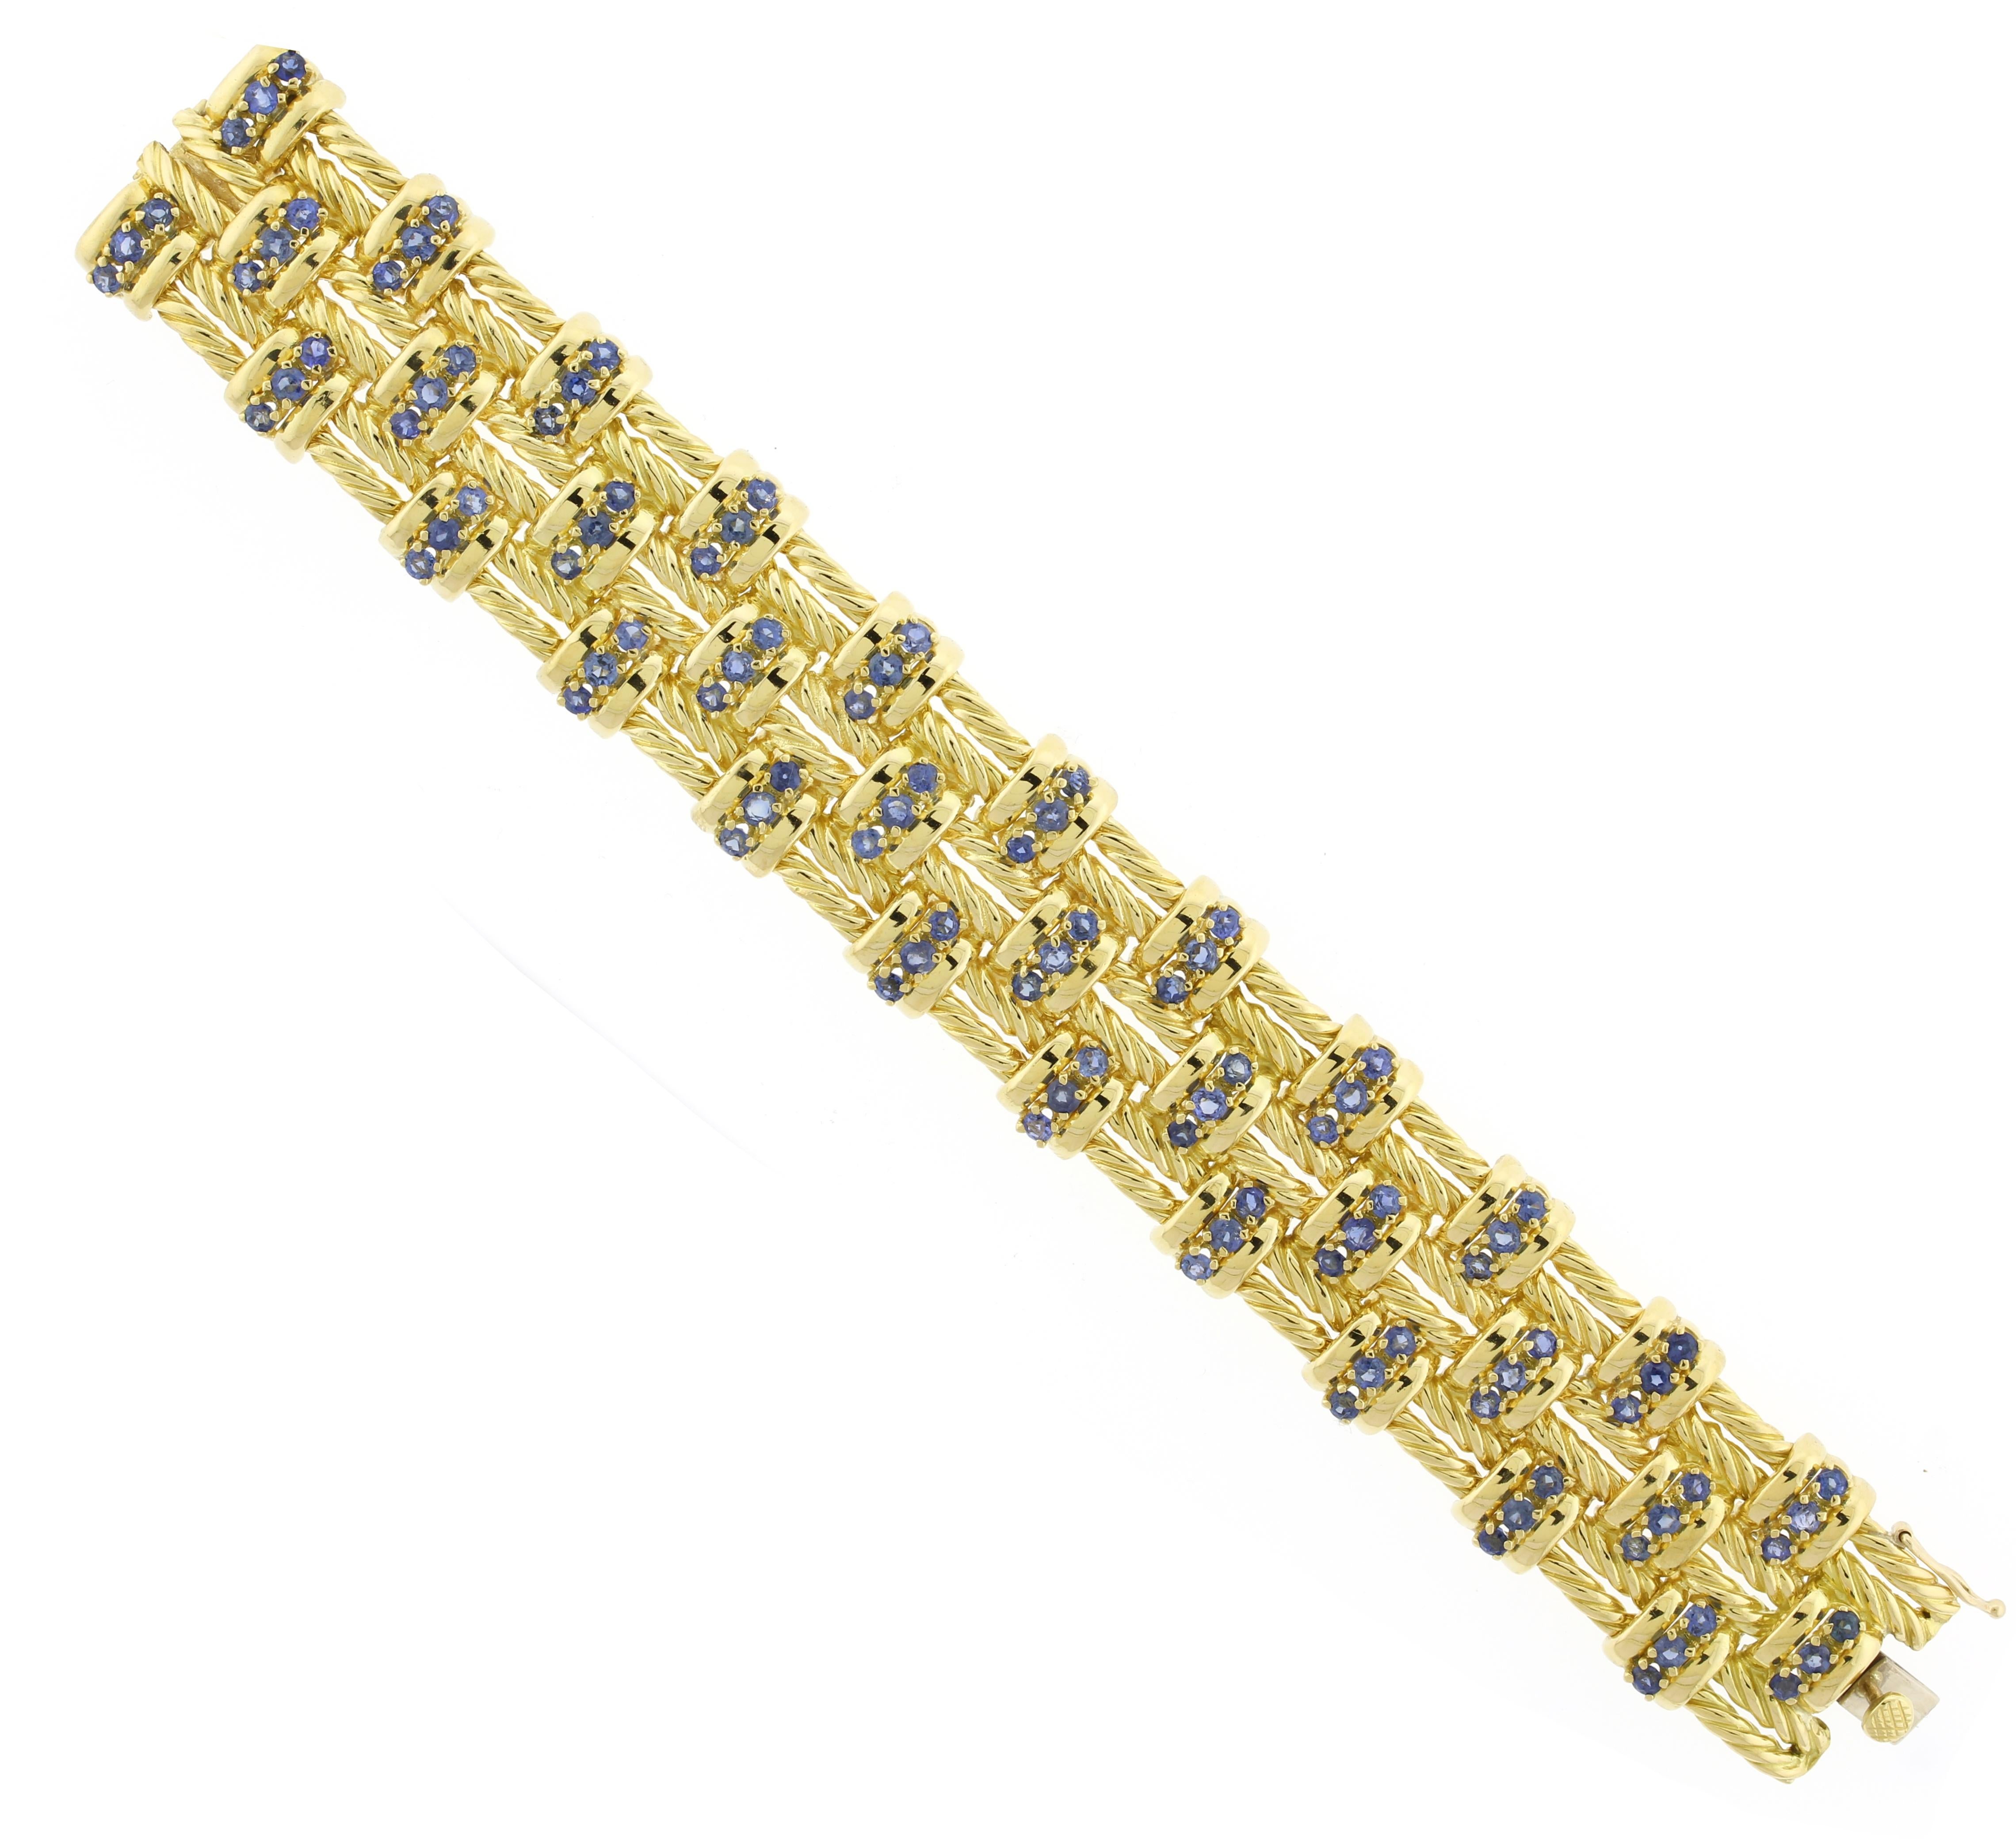 Tiffany & Co. 18kt Yellow Gold Sapphire Bracelet In Excellent Condition For Sale In Bethesda, MD